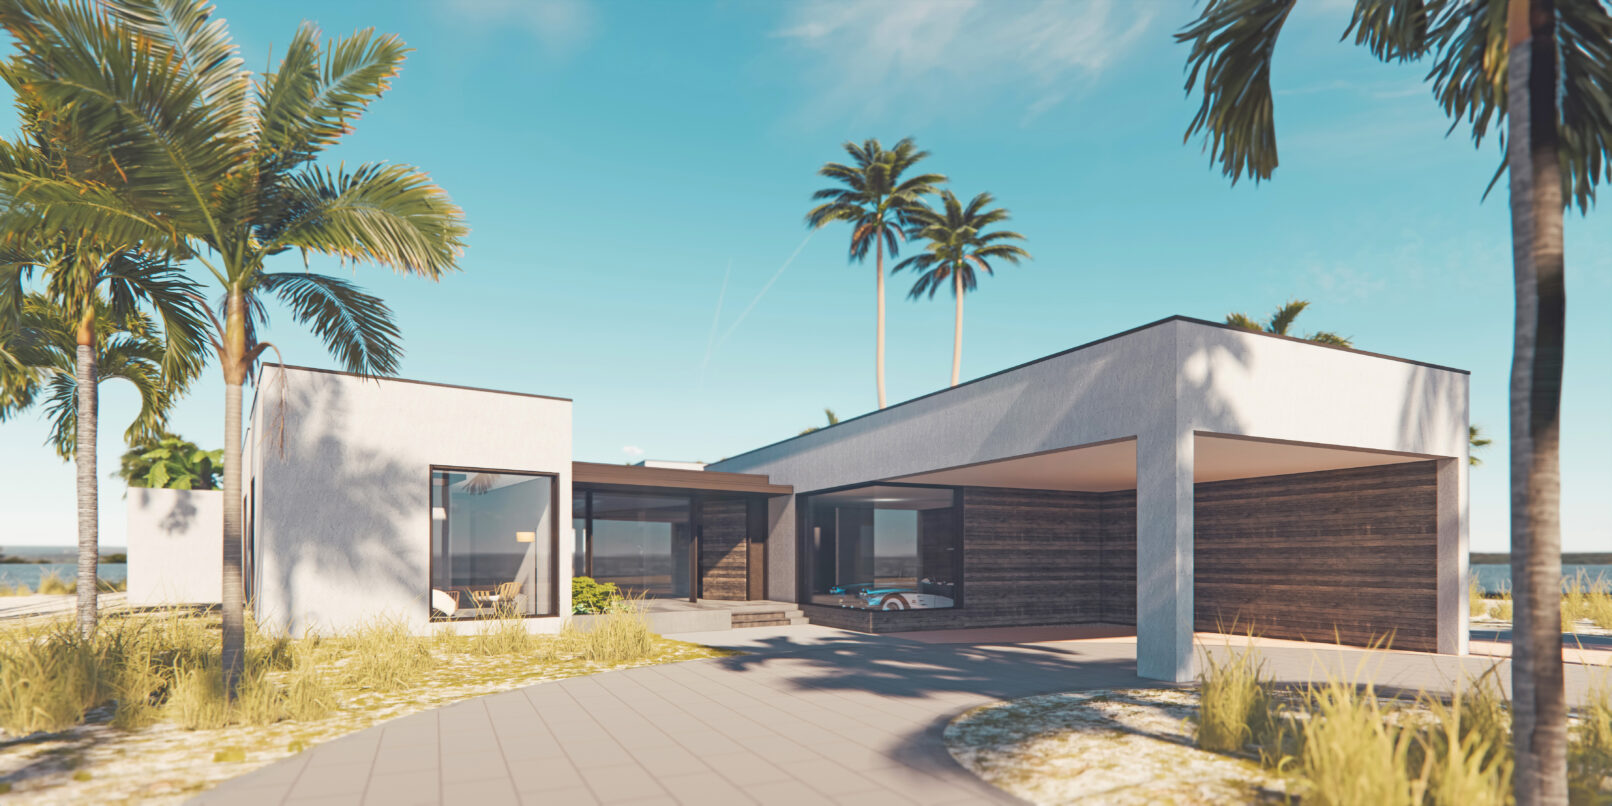 Beautiful Florida modern beach house designed by award winning architect on the water with palm trees, carport, and white stucco boxes.